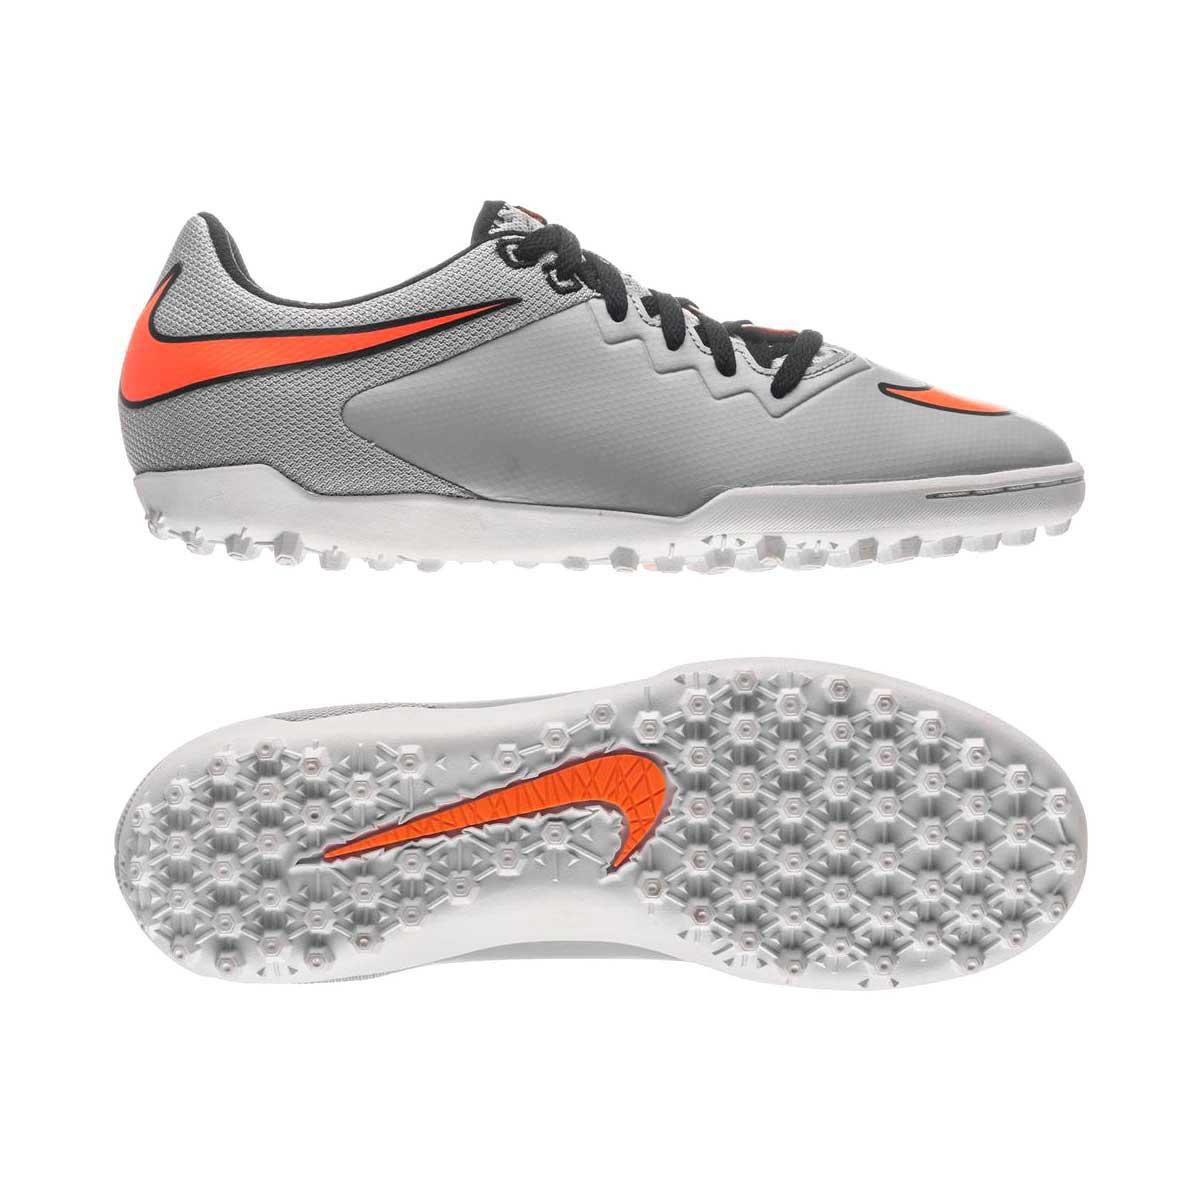 nike india shoes online, Off 67%,